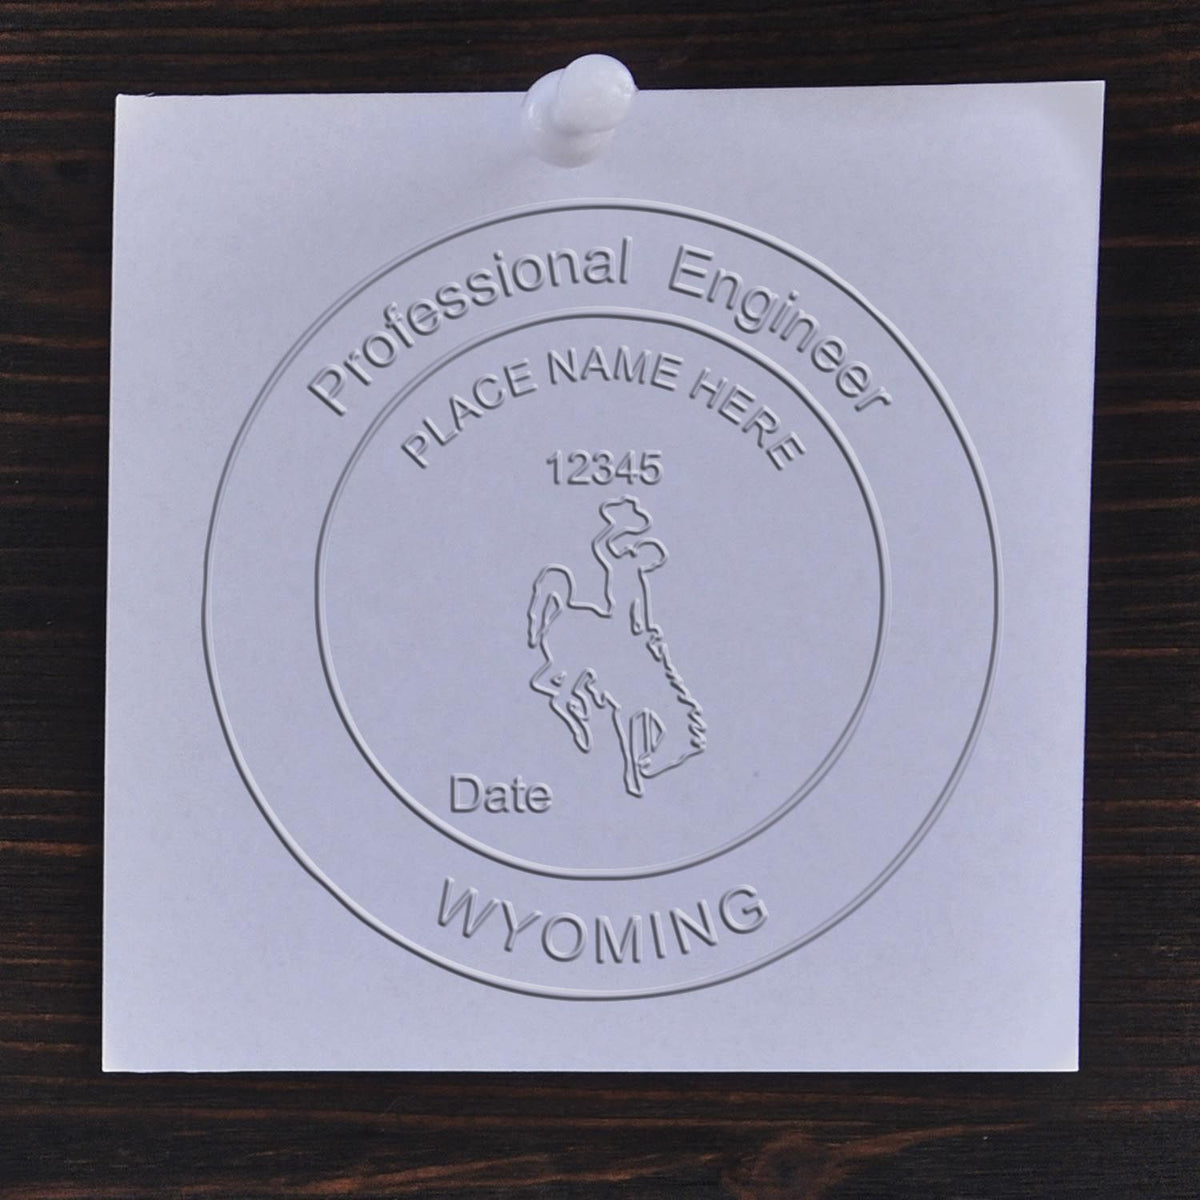 A photograph of the Soft Wyoming Professional Engineer Seal stamp impression reveals a vivid, professional image of the on paper.